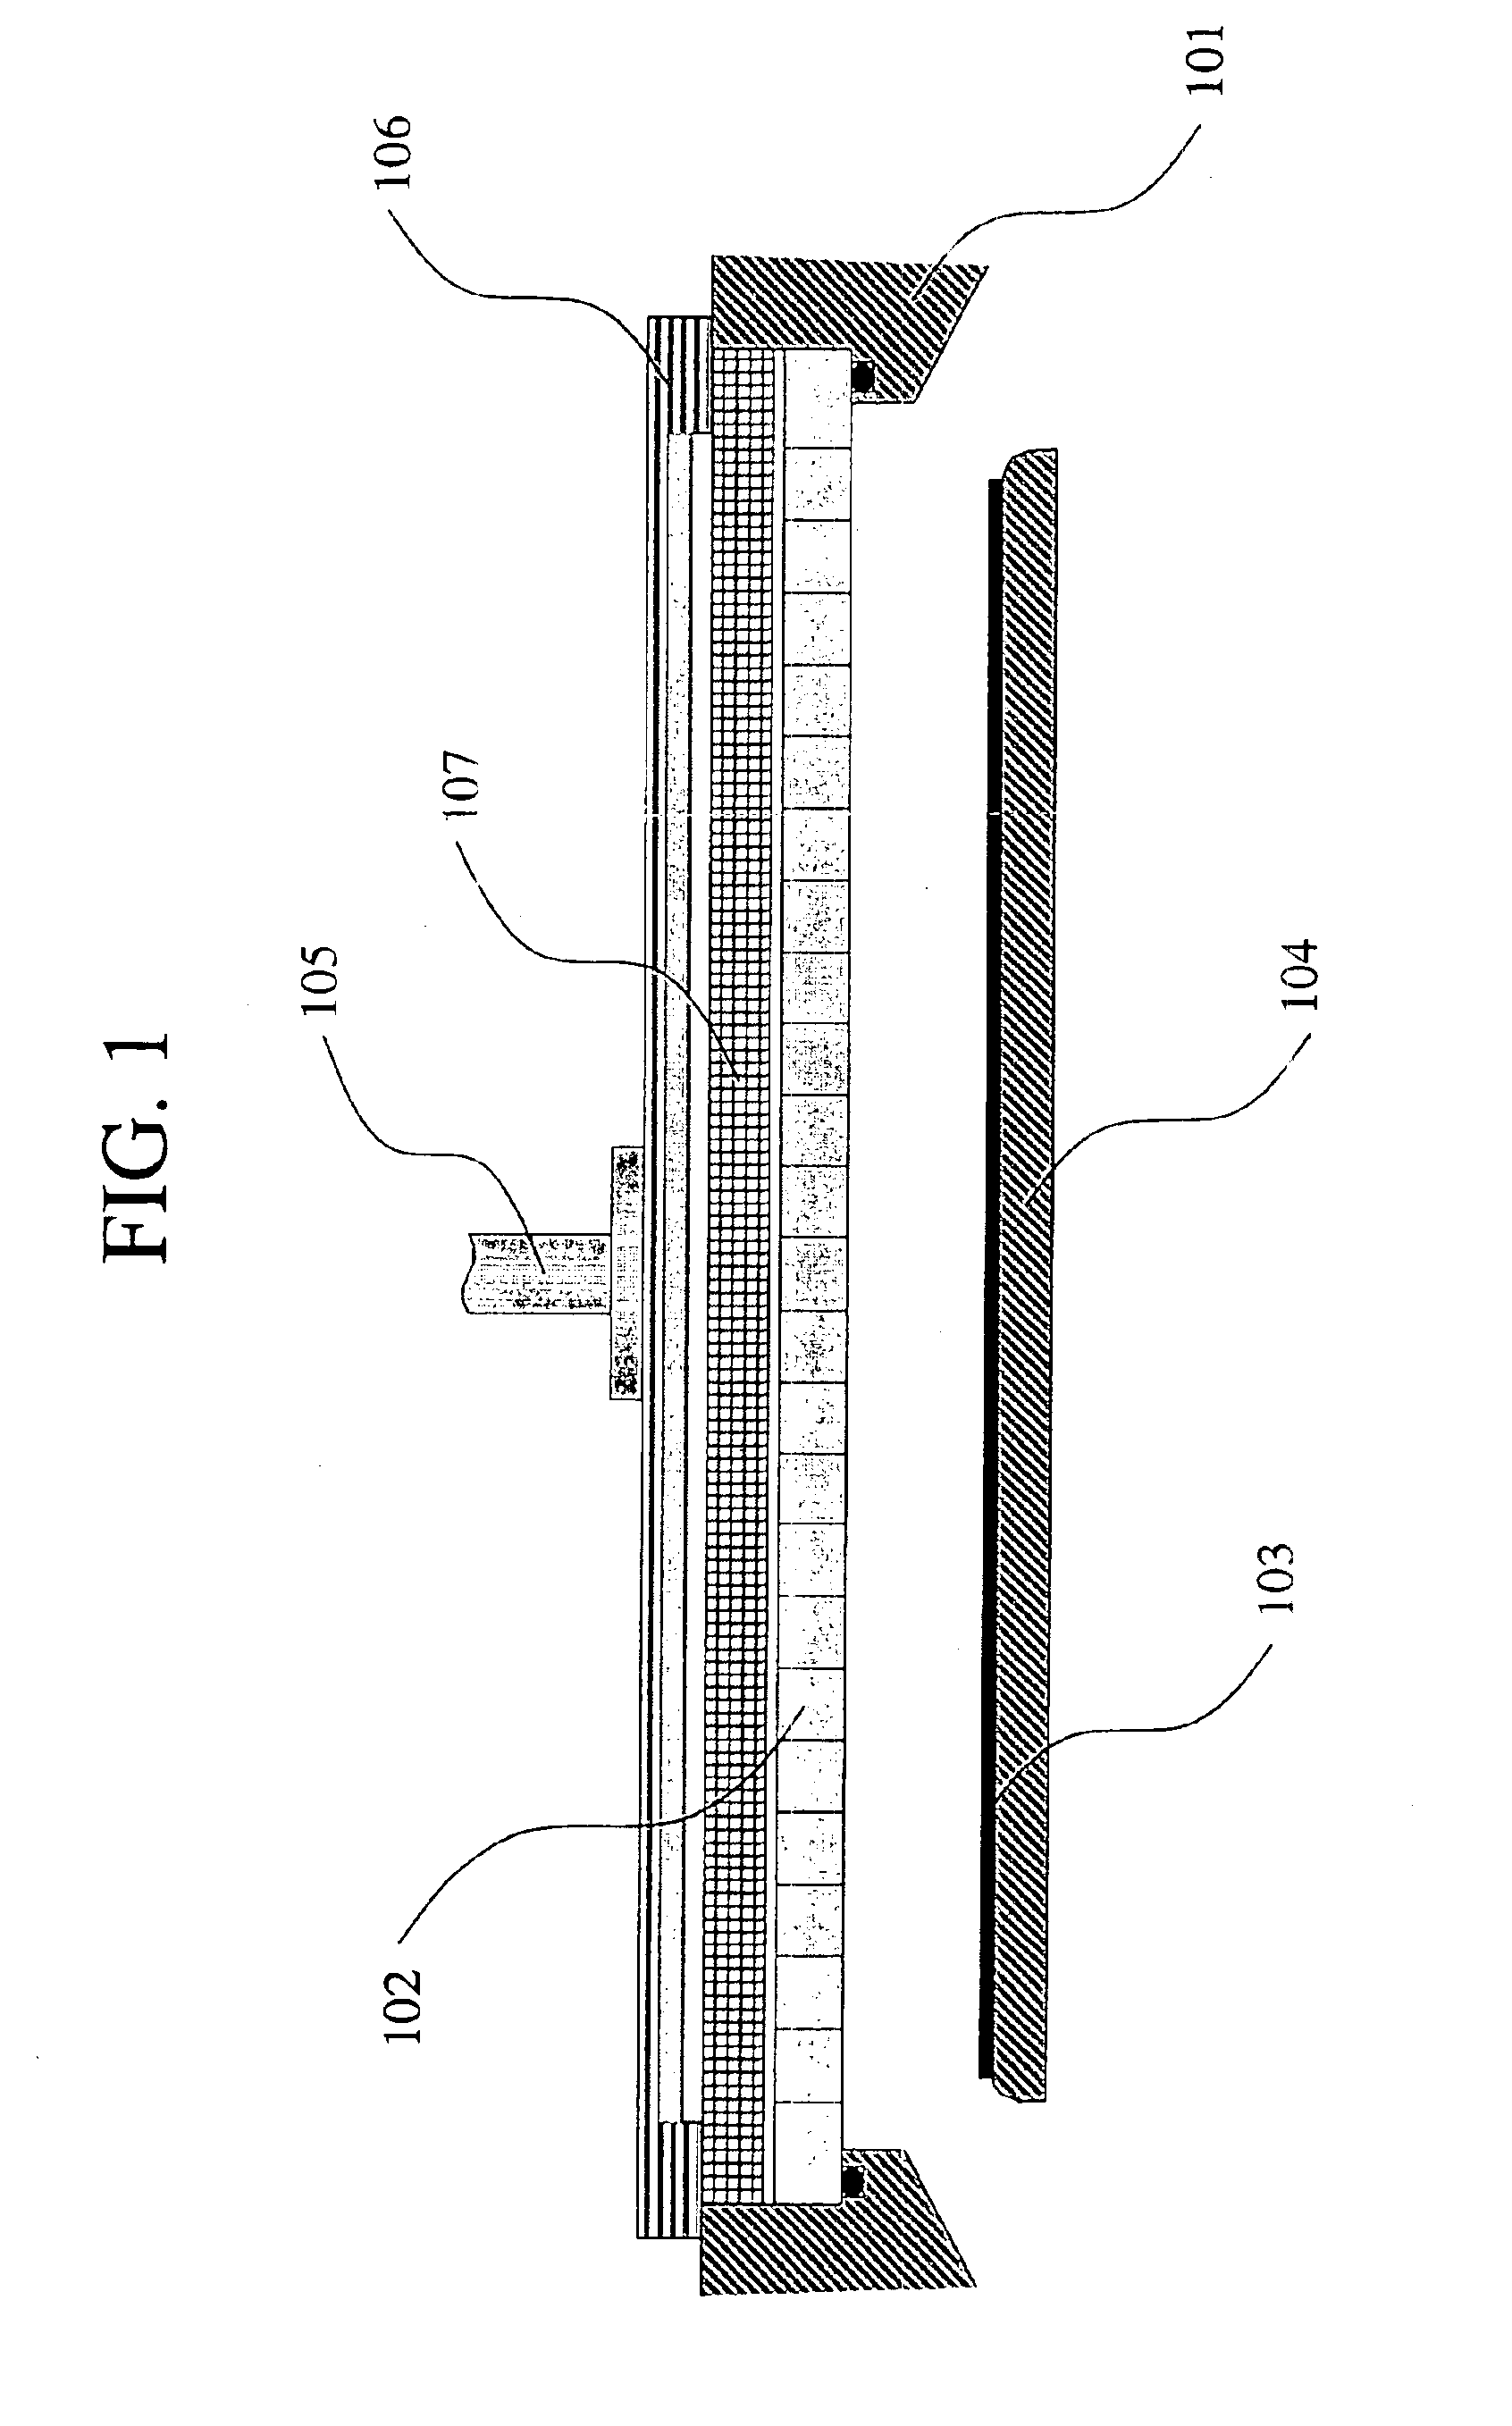 Semiconductor device formed on (111) surface of a Si crystal and fabrication process thereof